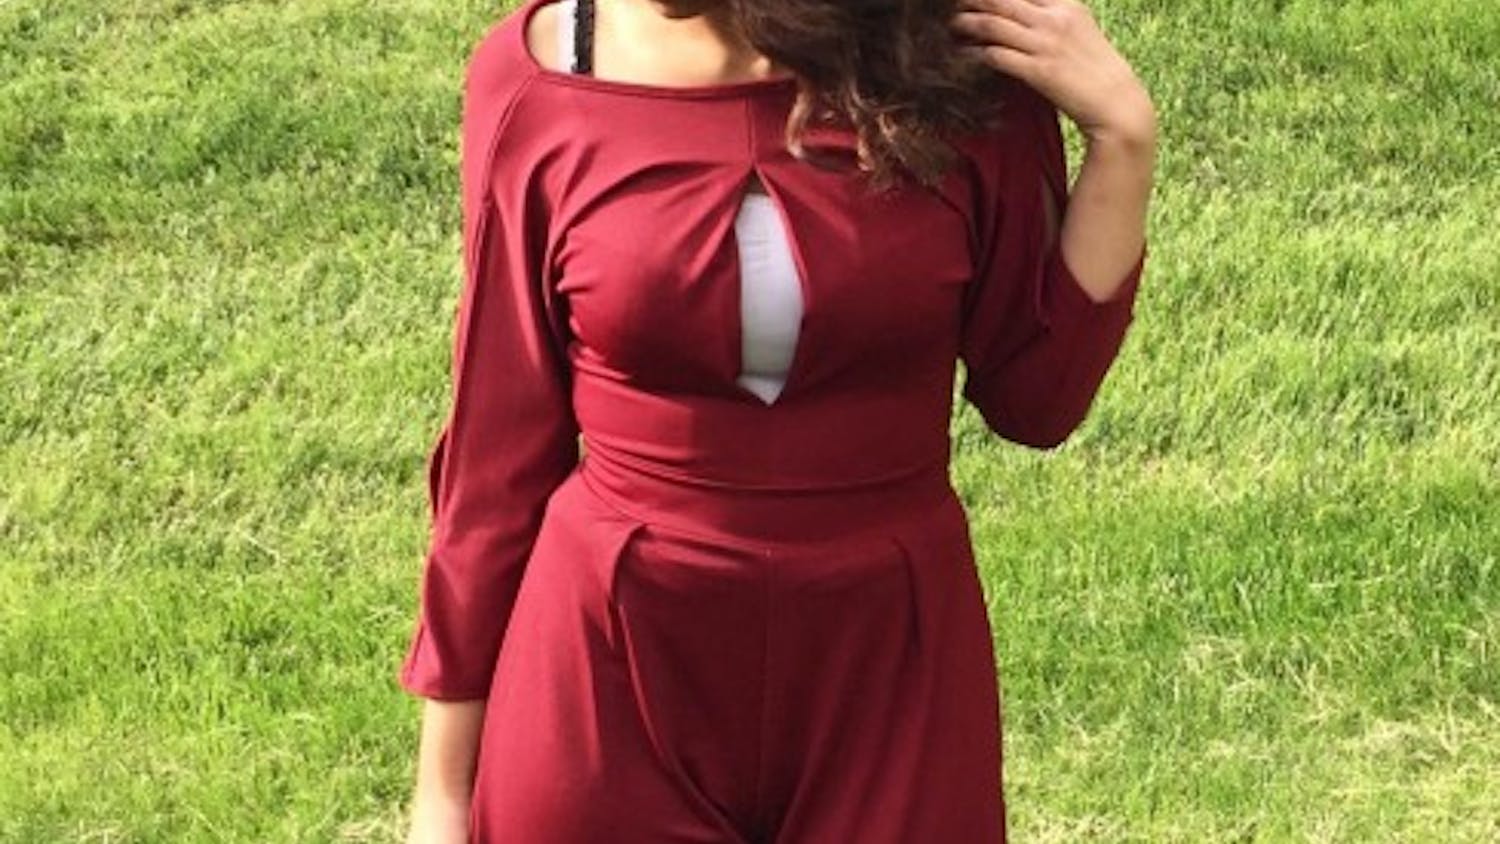 Find a similar jumpsuit here!